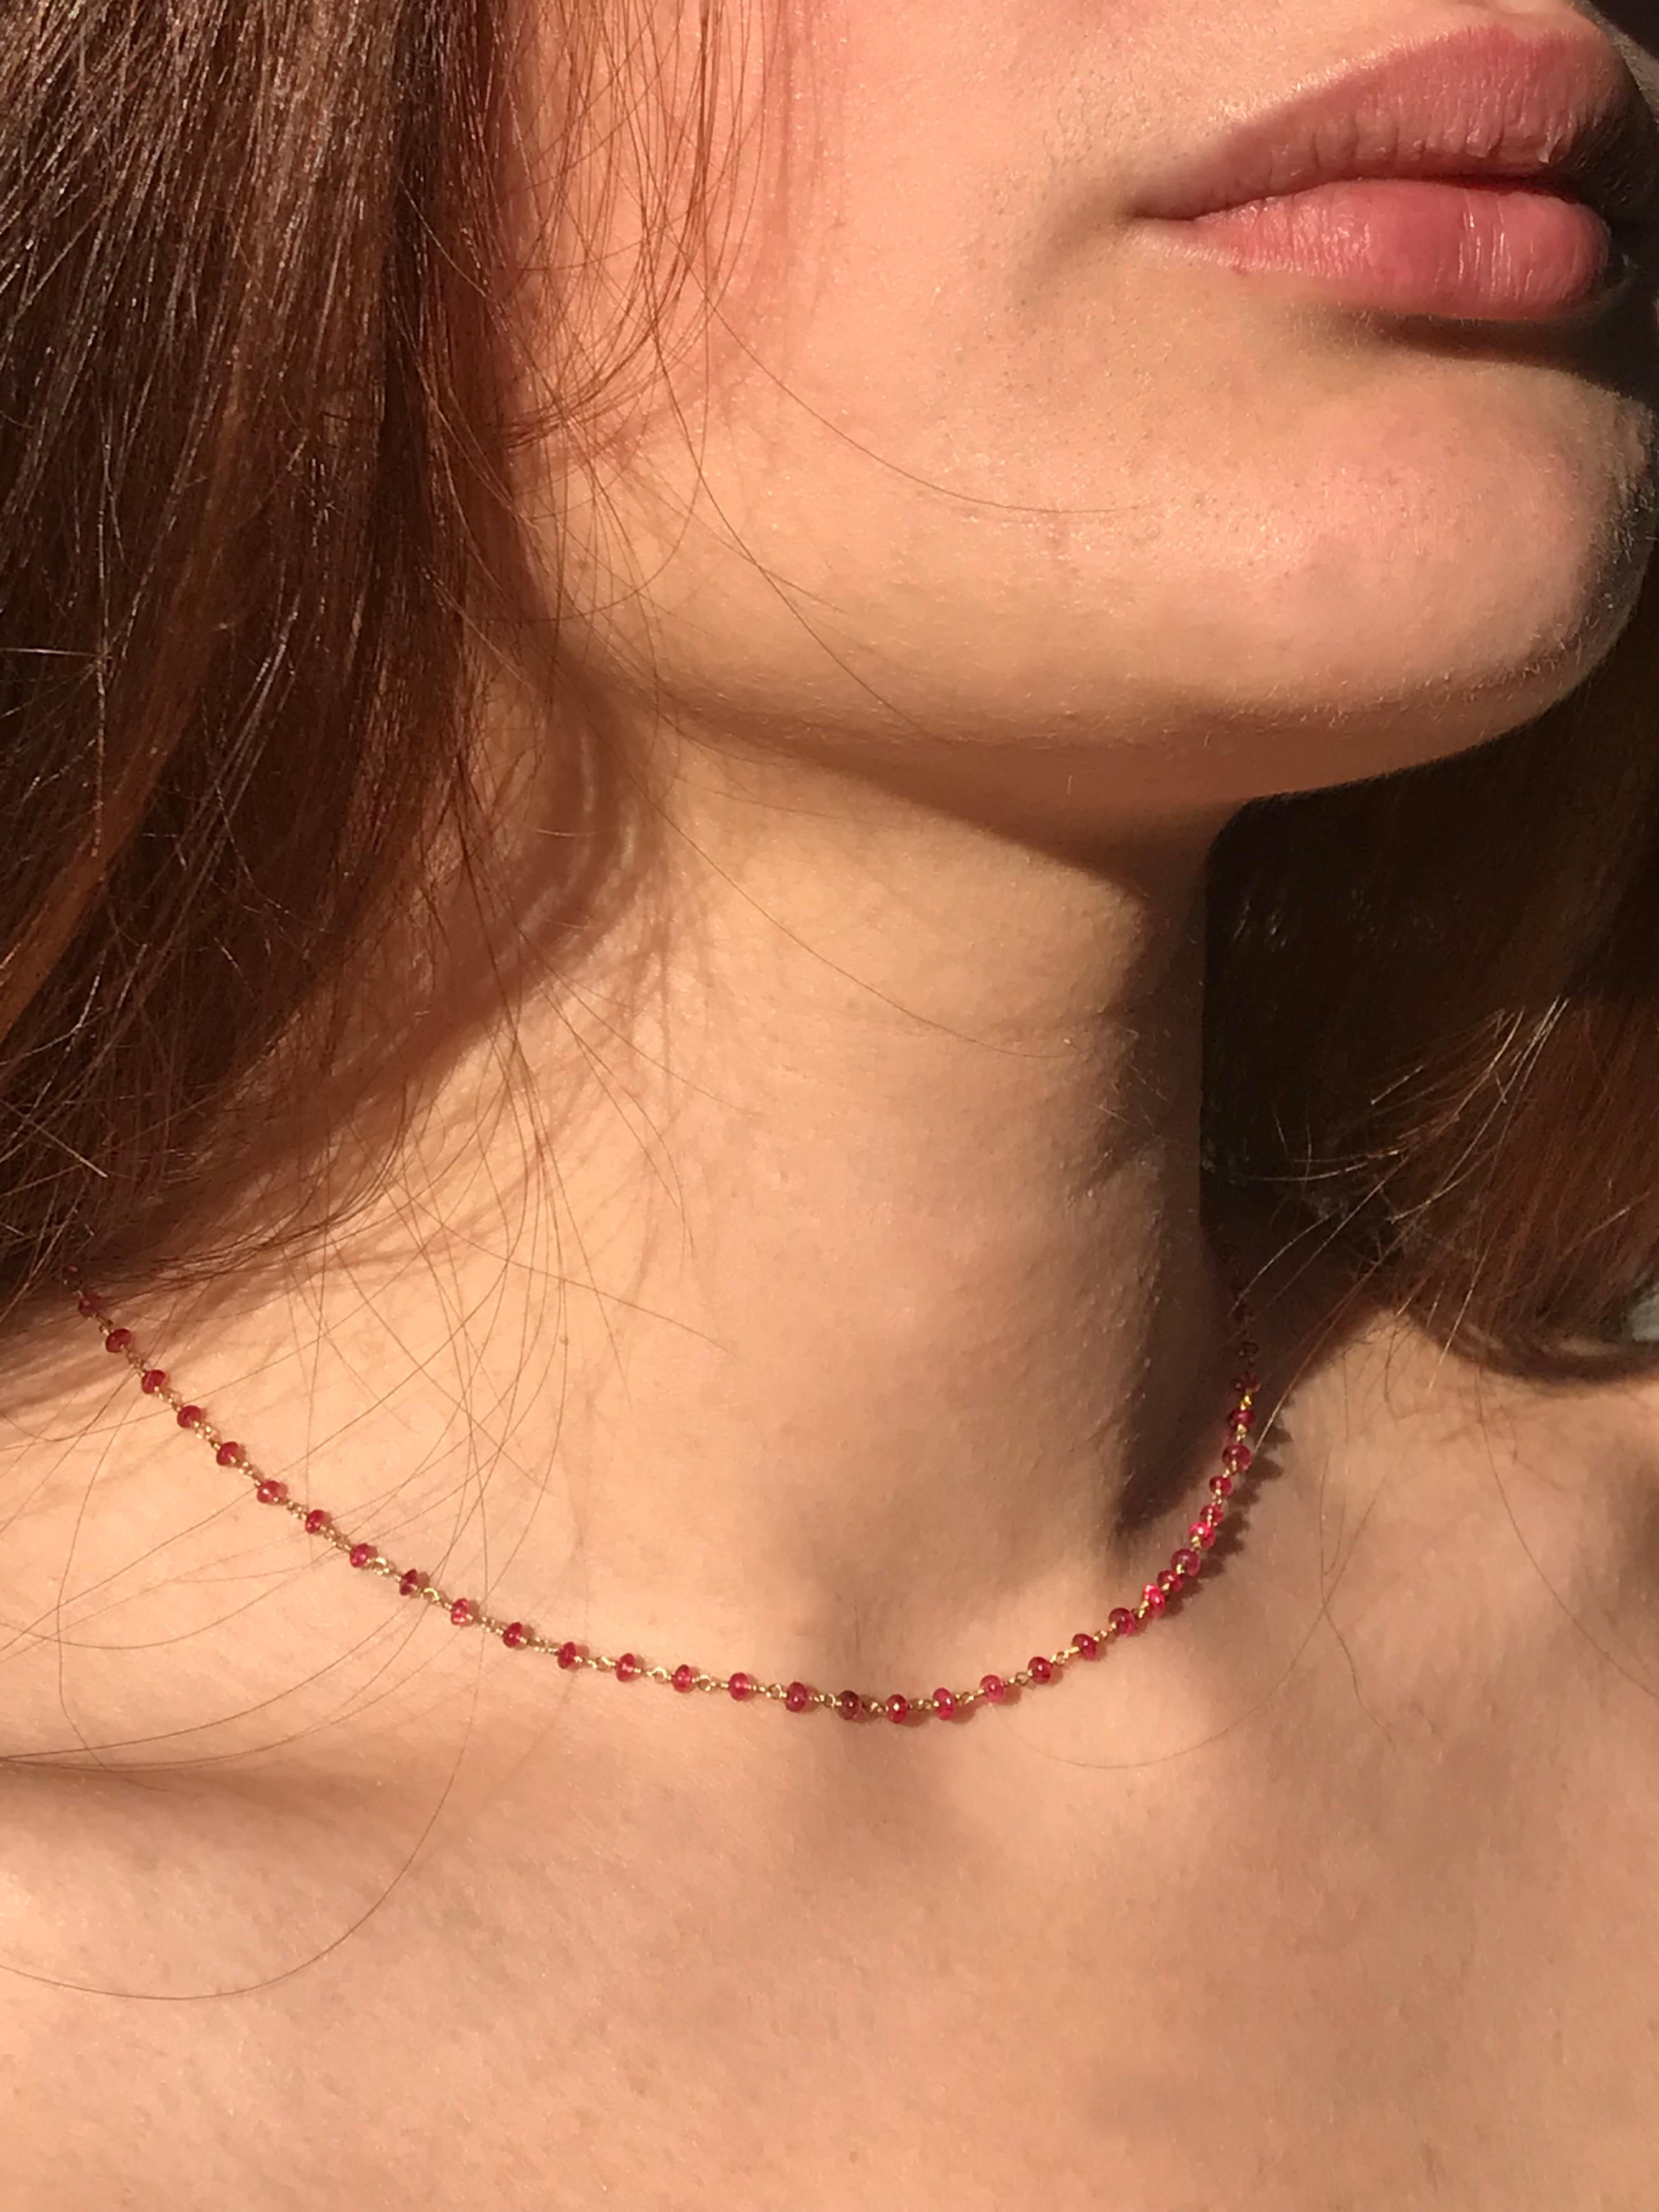 Dalben design hand crafted necklace composed of 6,7 carat beads spinel and 18 k yellow gold in rosary style. 
The necklace length is 15,75 inch (40 cm) .
Red spinel beads dimension: 2,6 mm circa .
This necklace has been designed and handcrafted in